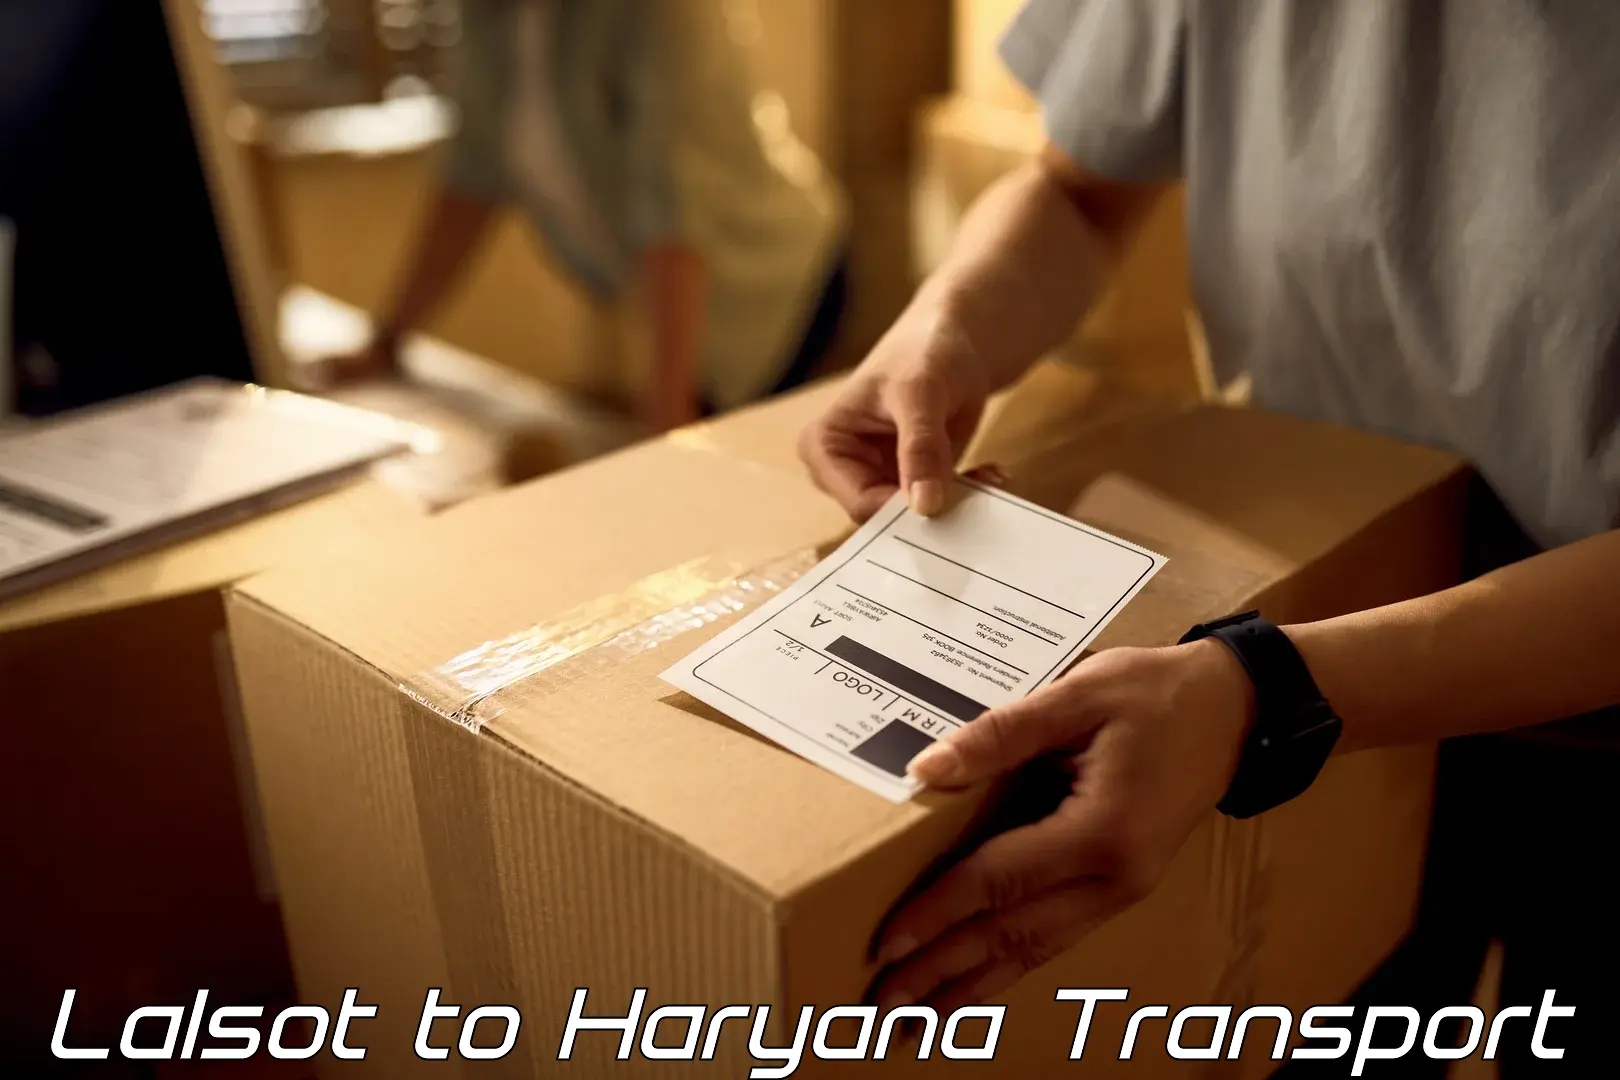 Express transport services Lalsot to Bilaspur Haryana